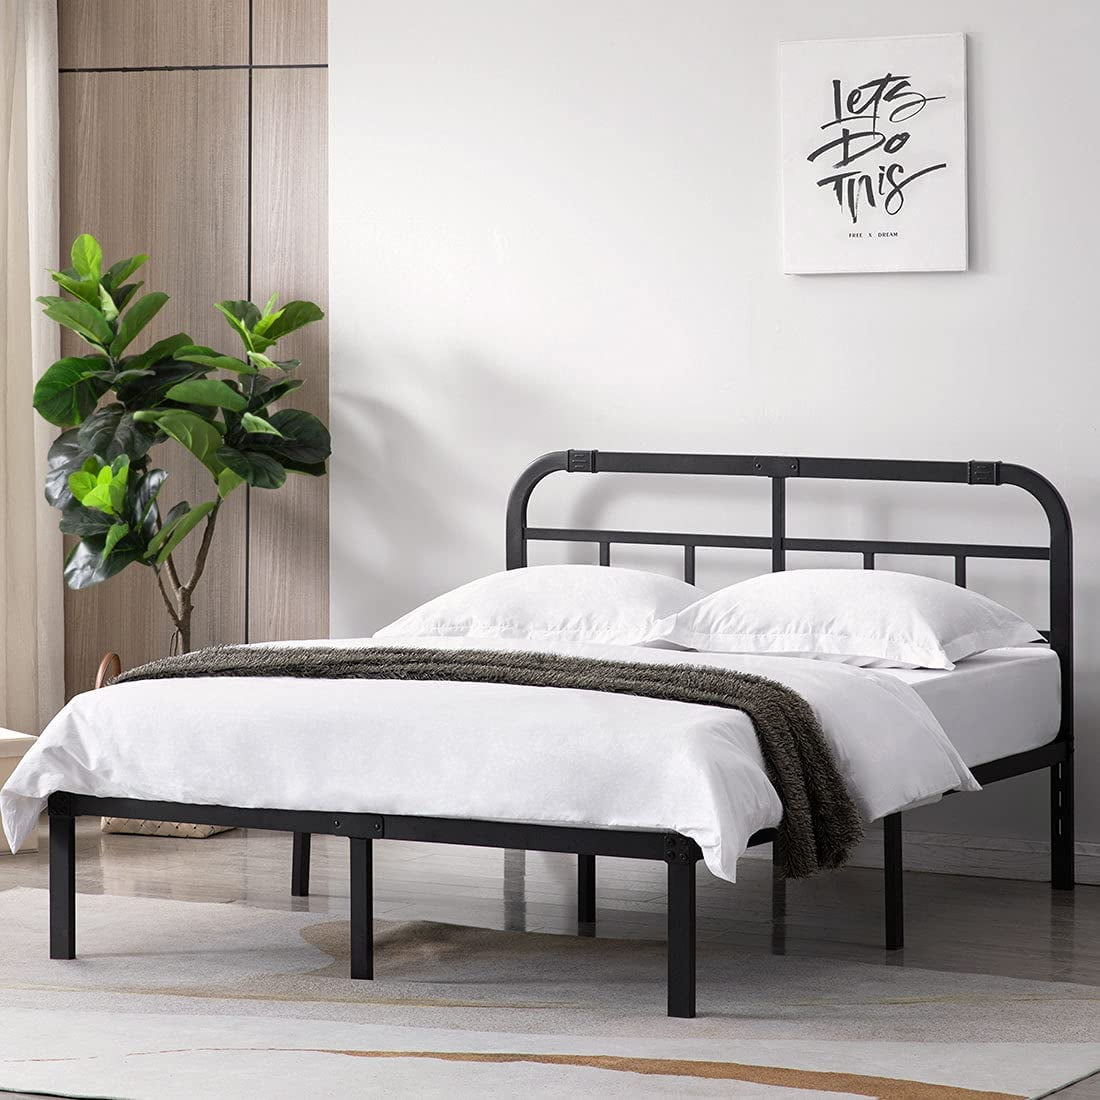 TATAGO Metal Bed Frame Heavy Duty Platform Foundation Queen Size with Headboard 